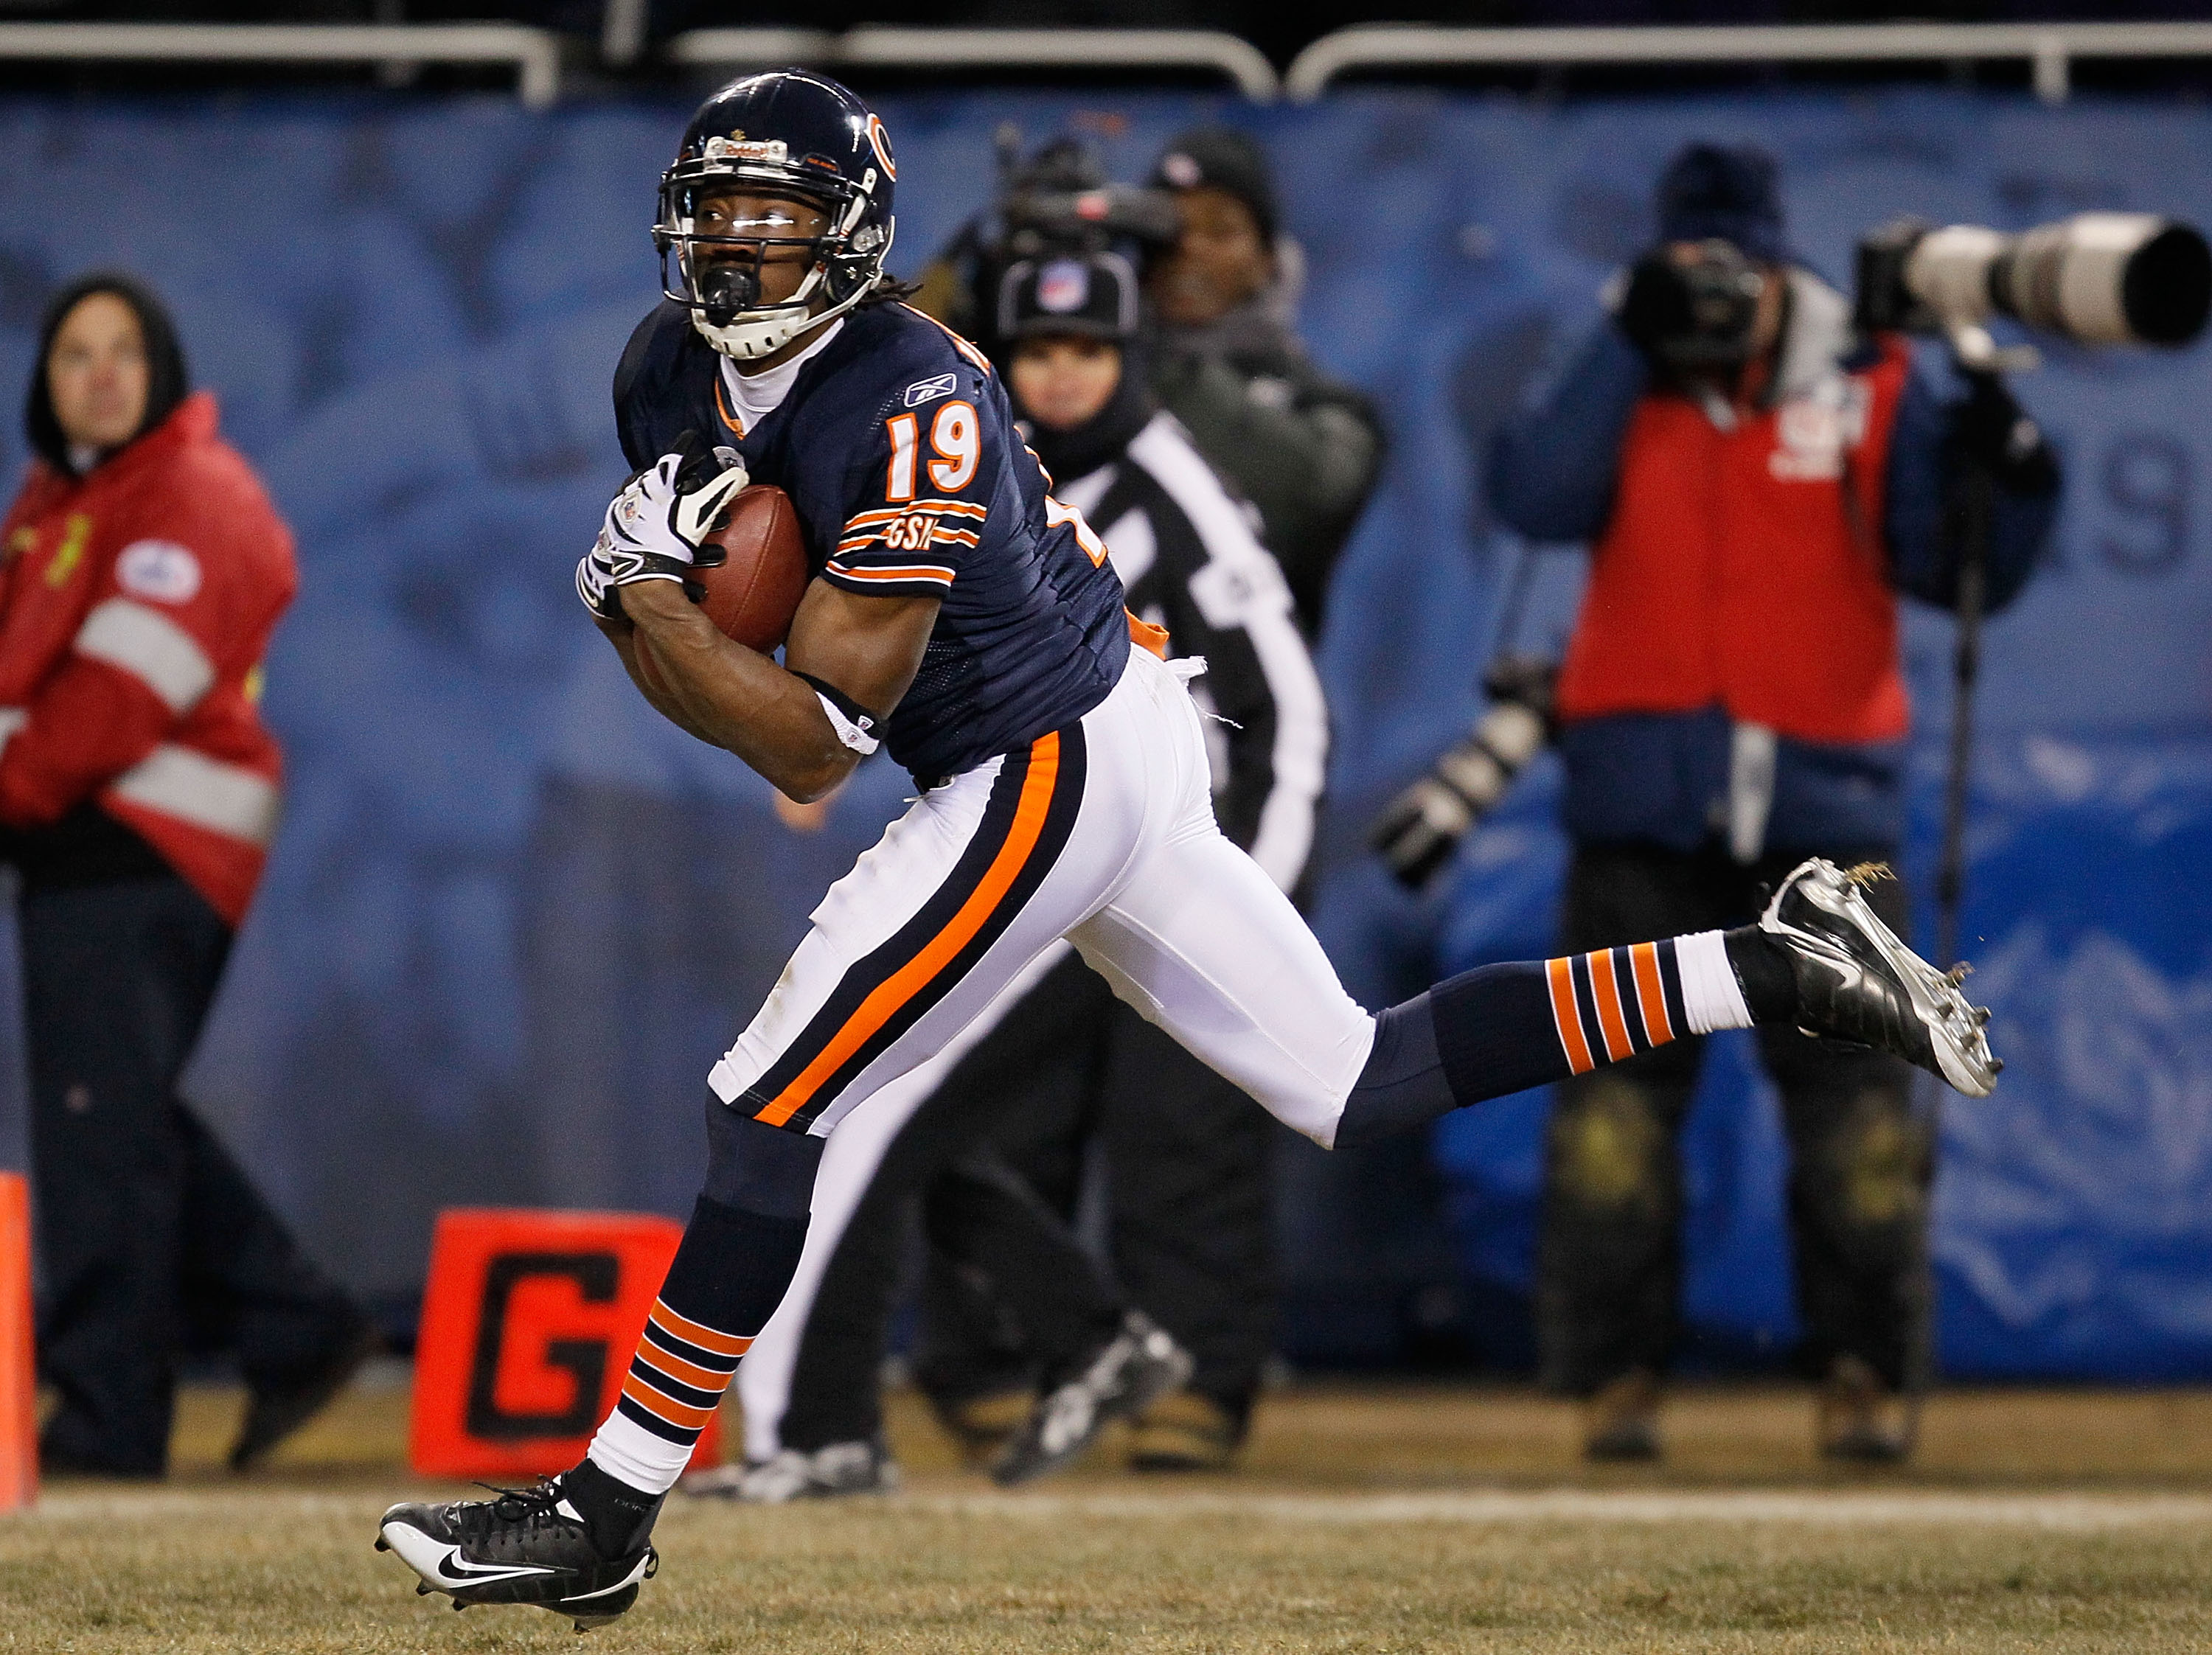 CHICAGO - DECEMBER 28: Devin Aromashodu #19 of the Chicago Bears catches the game-winning touchdown pass against the Minnesota Vikings at Soldier Field on December 28, 2009 in Chicago, Illinois. The Bears defeated the Vikings 36-30 in overtime. (Photo by 